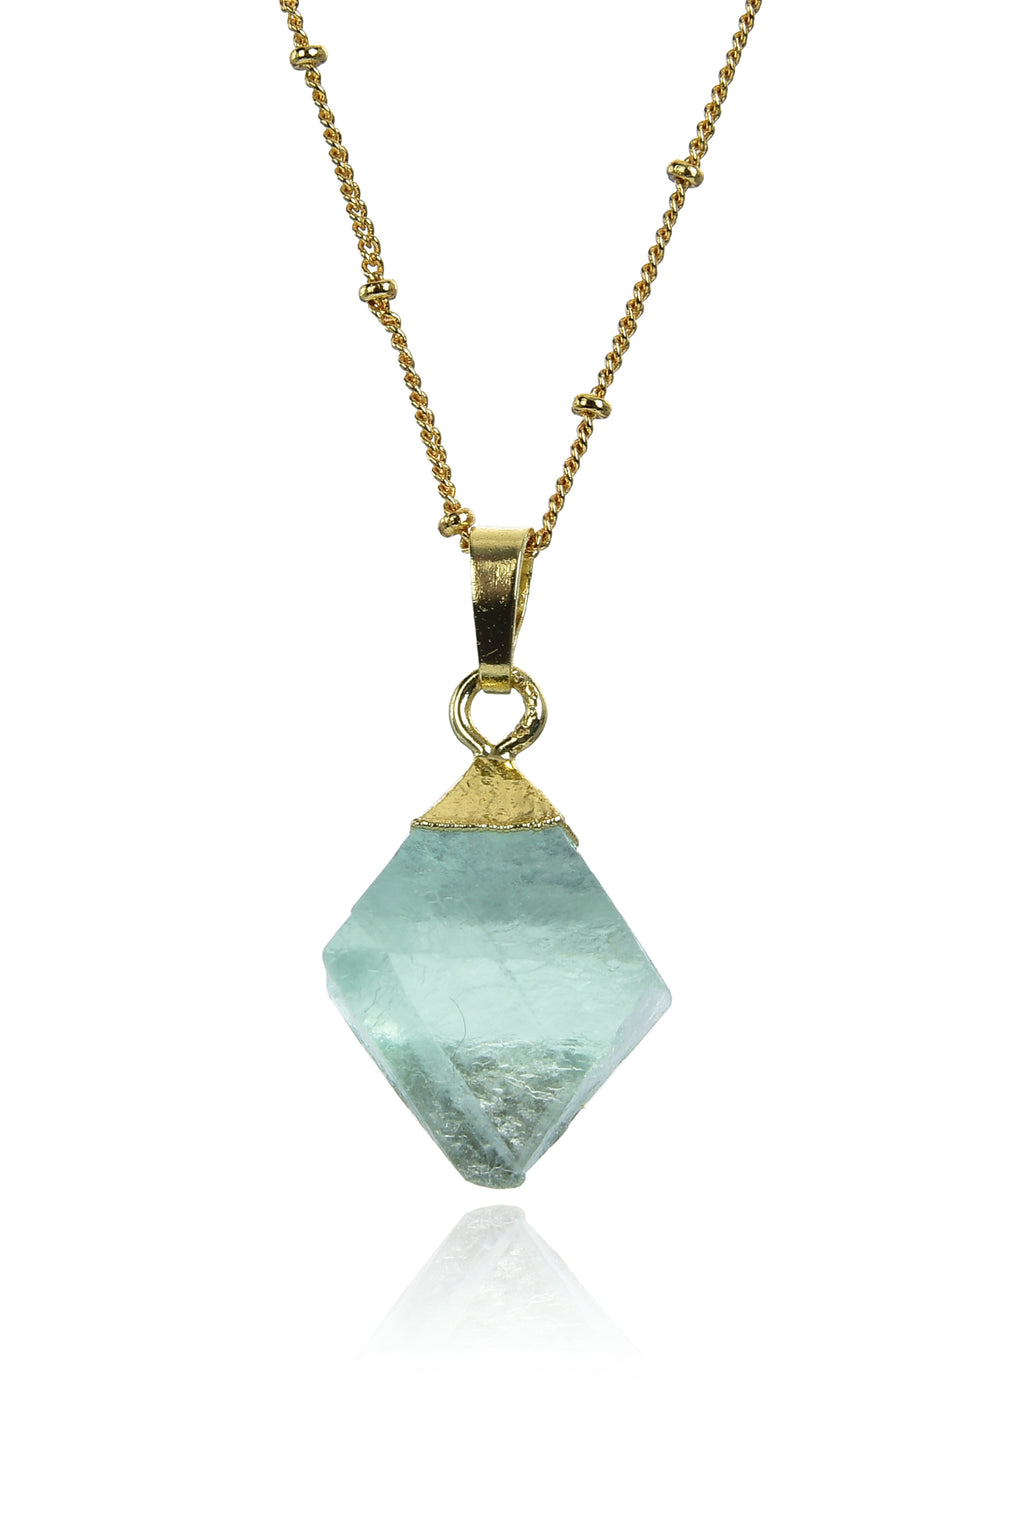 Gold chain necklace with medium sized green fluroite diamond shaped crystal pendant.